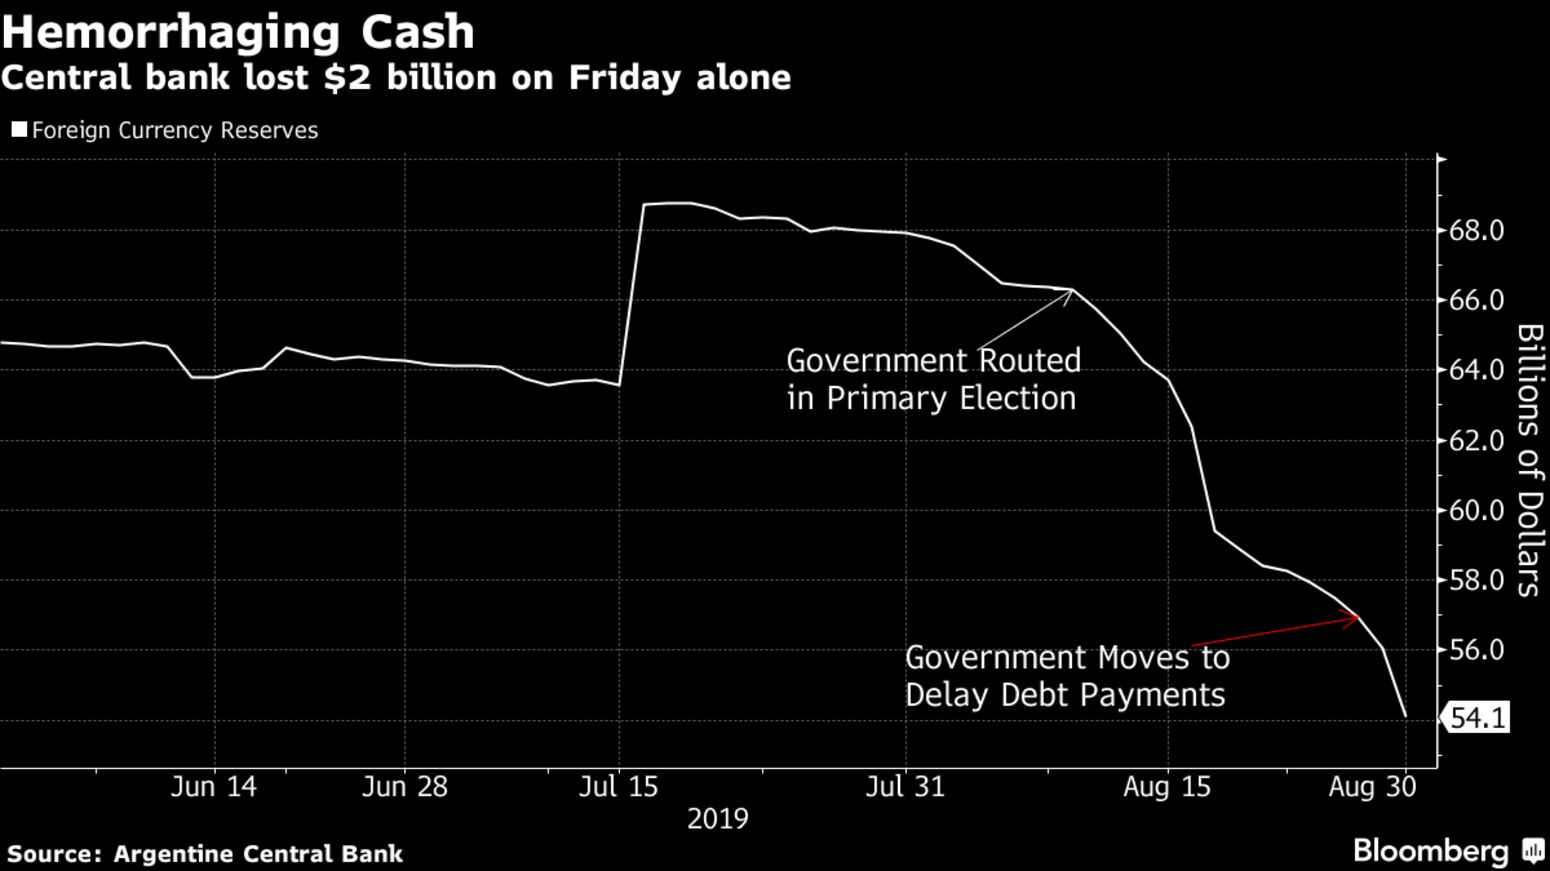 Central bank lost $2 billion on Friday alone